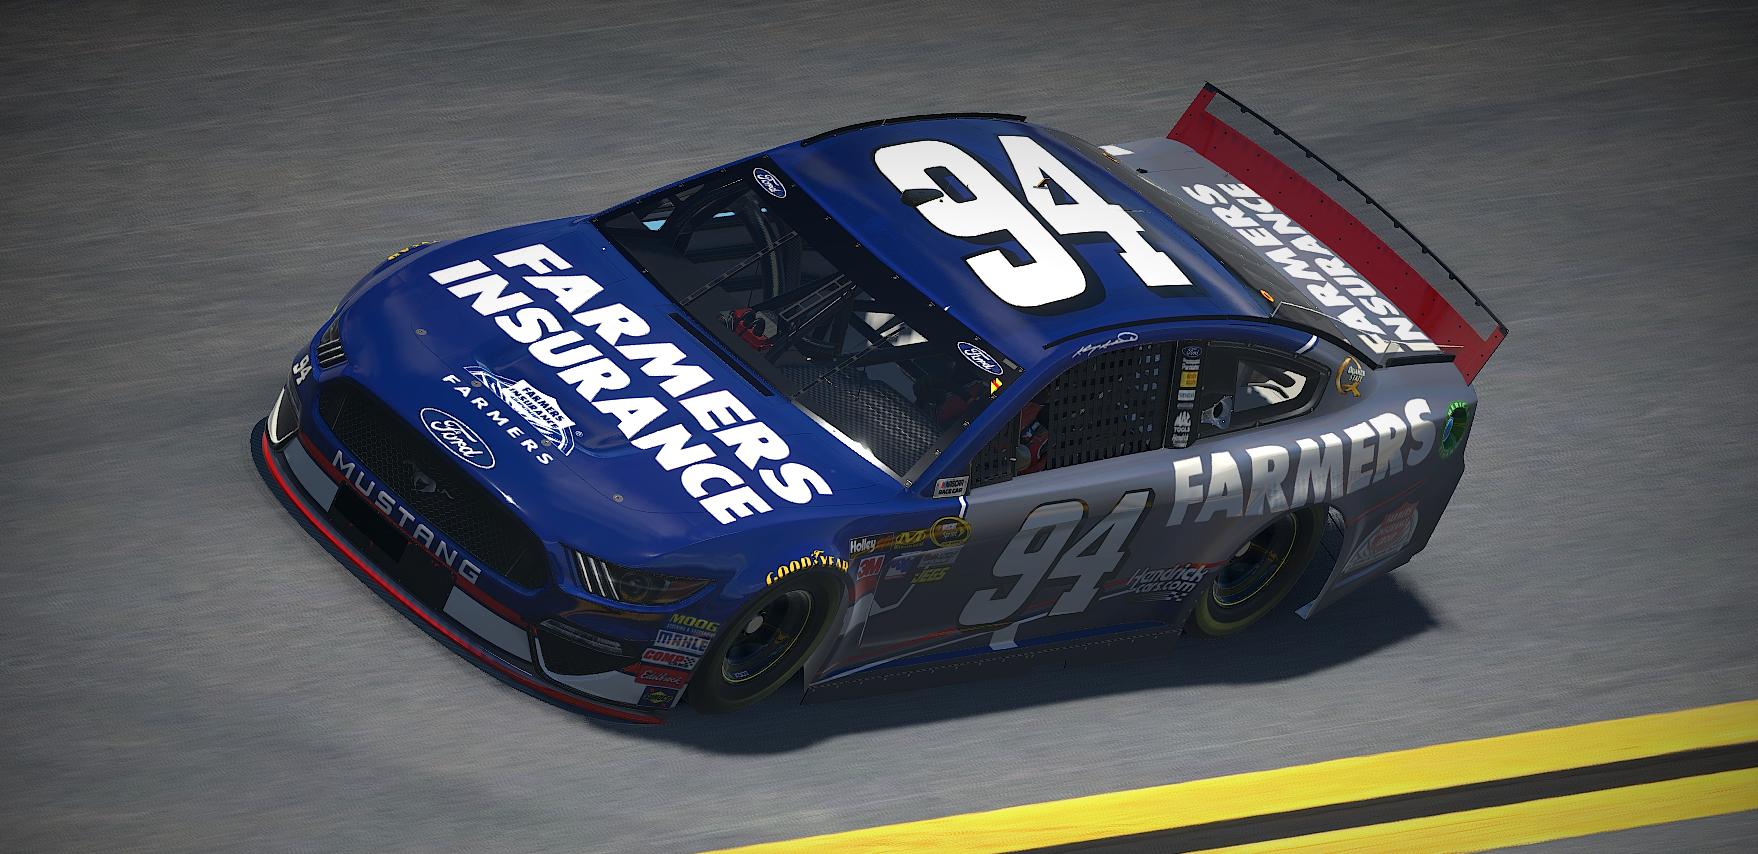 Preview of 2012 Kasey Kahne Fictional Farmers Insurance #94 by Brennan MaGee